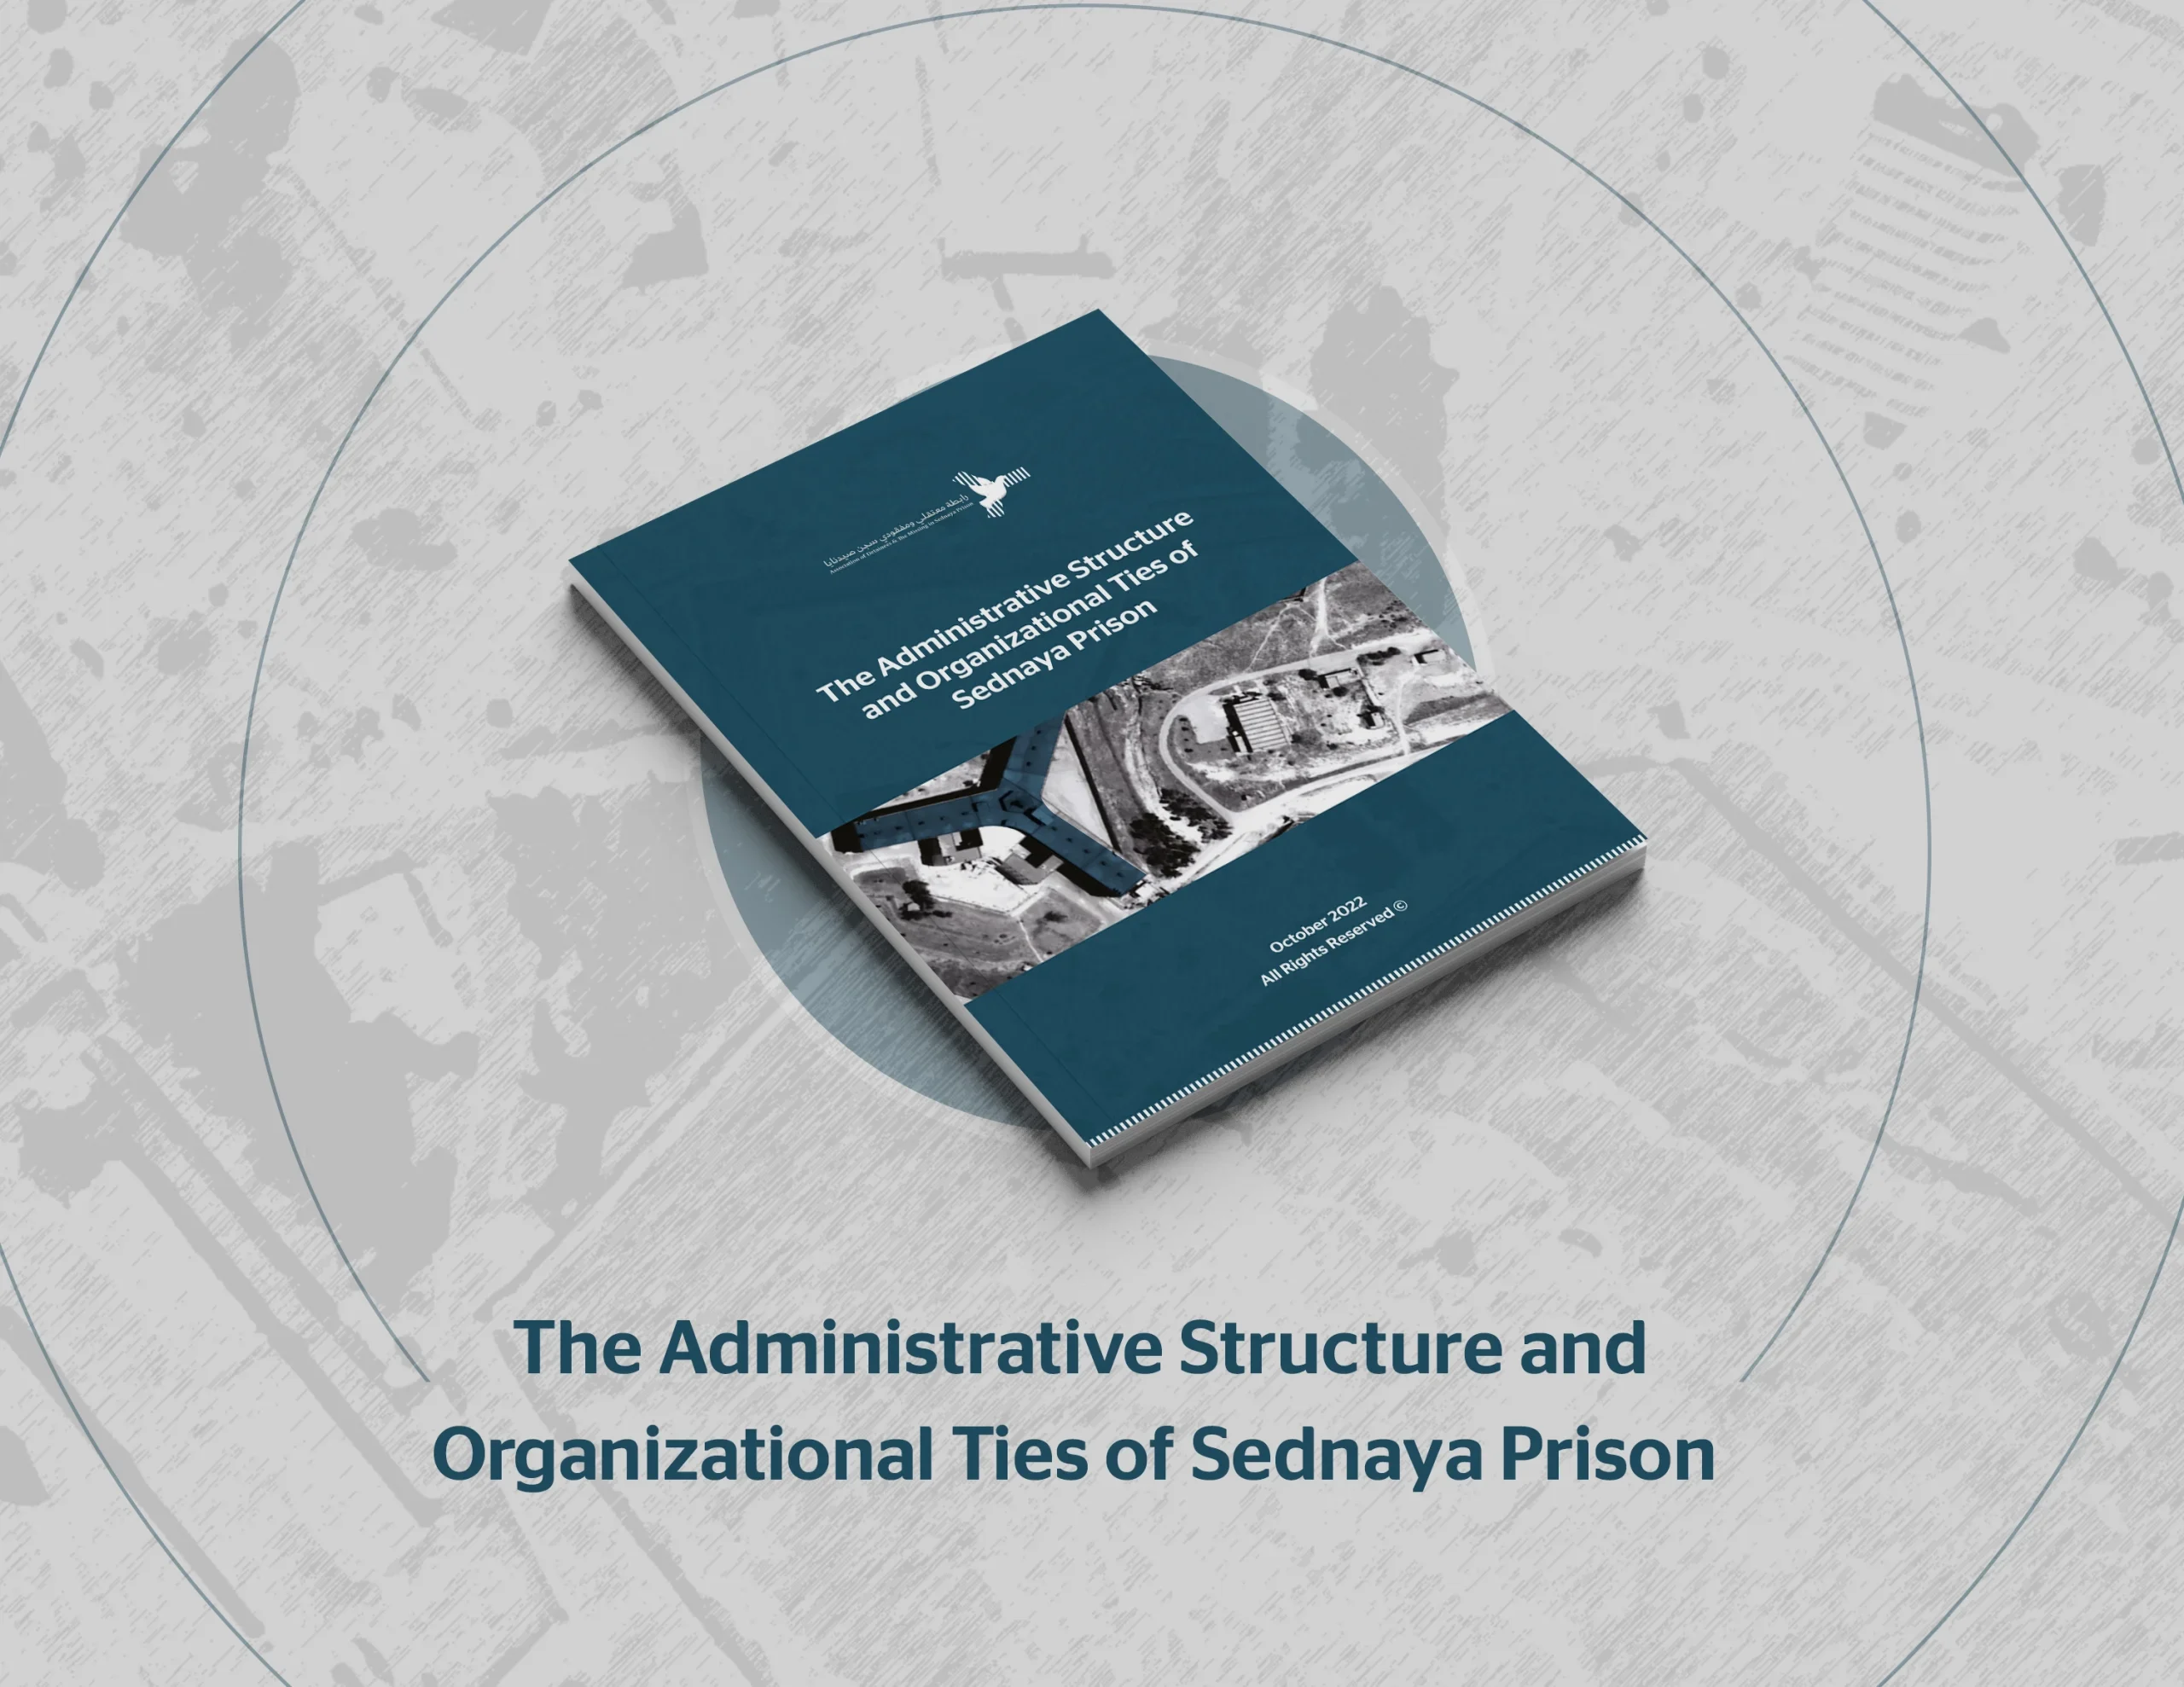 The Administrative Structure and Organizational Ties of Sednaya Prison